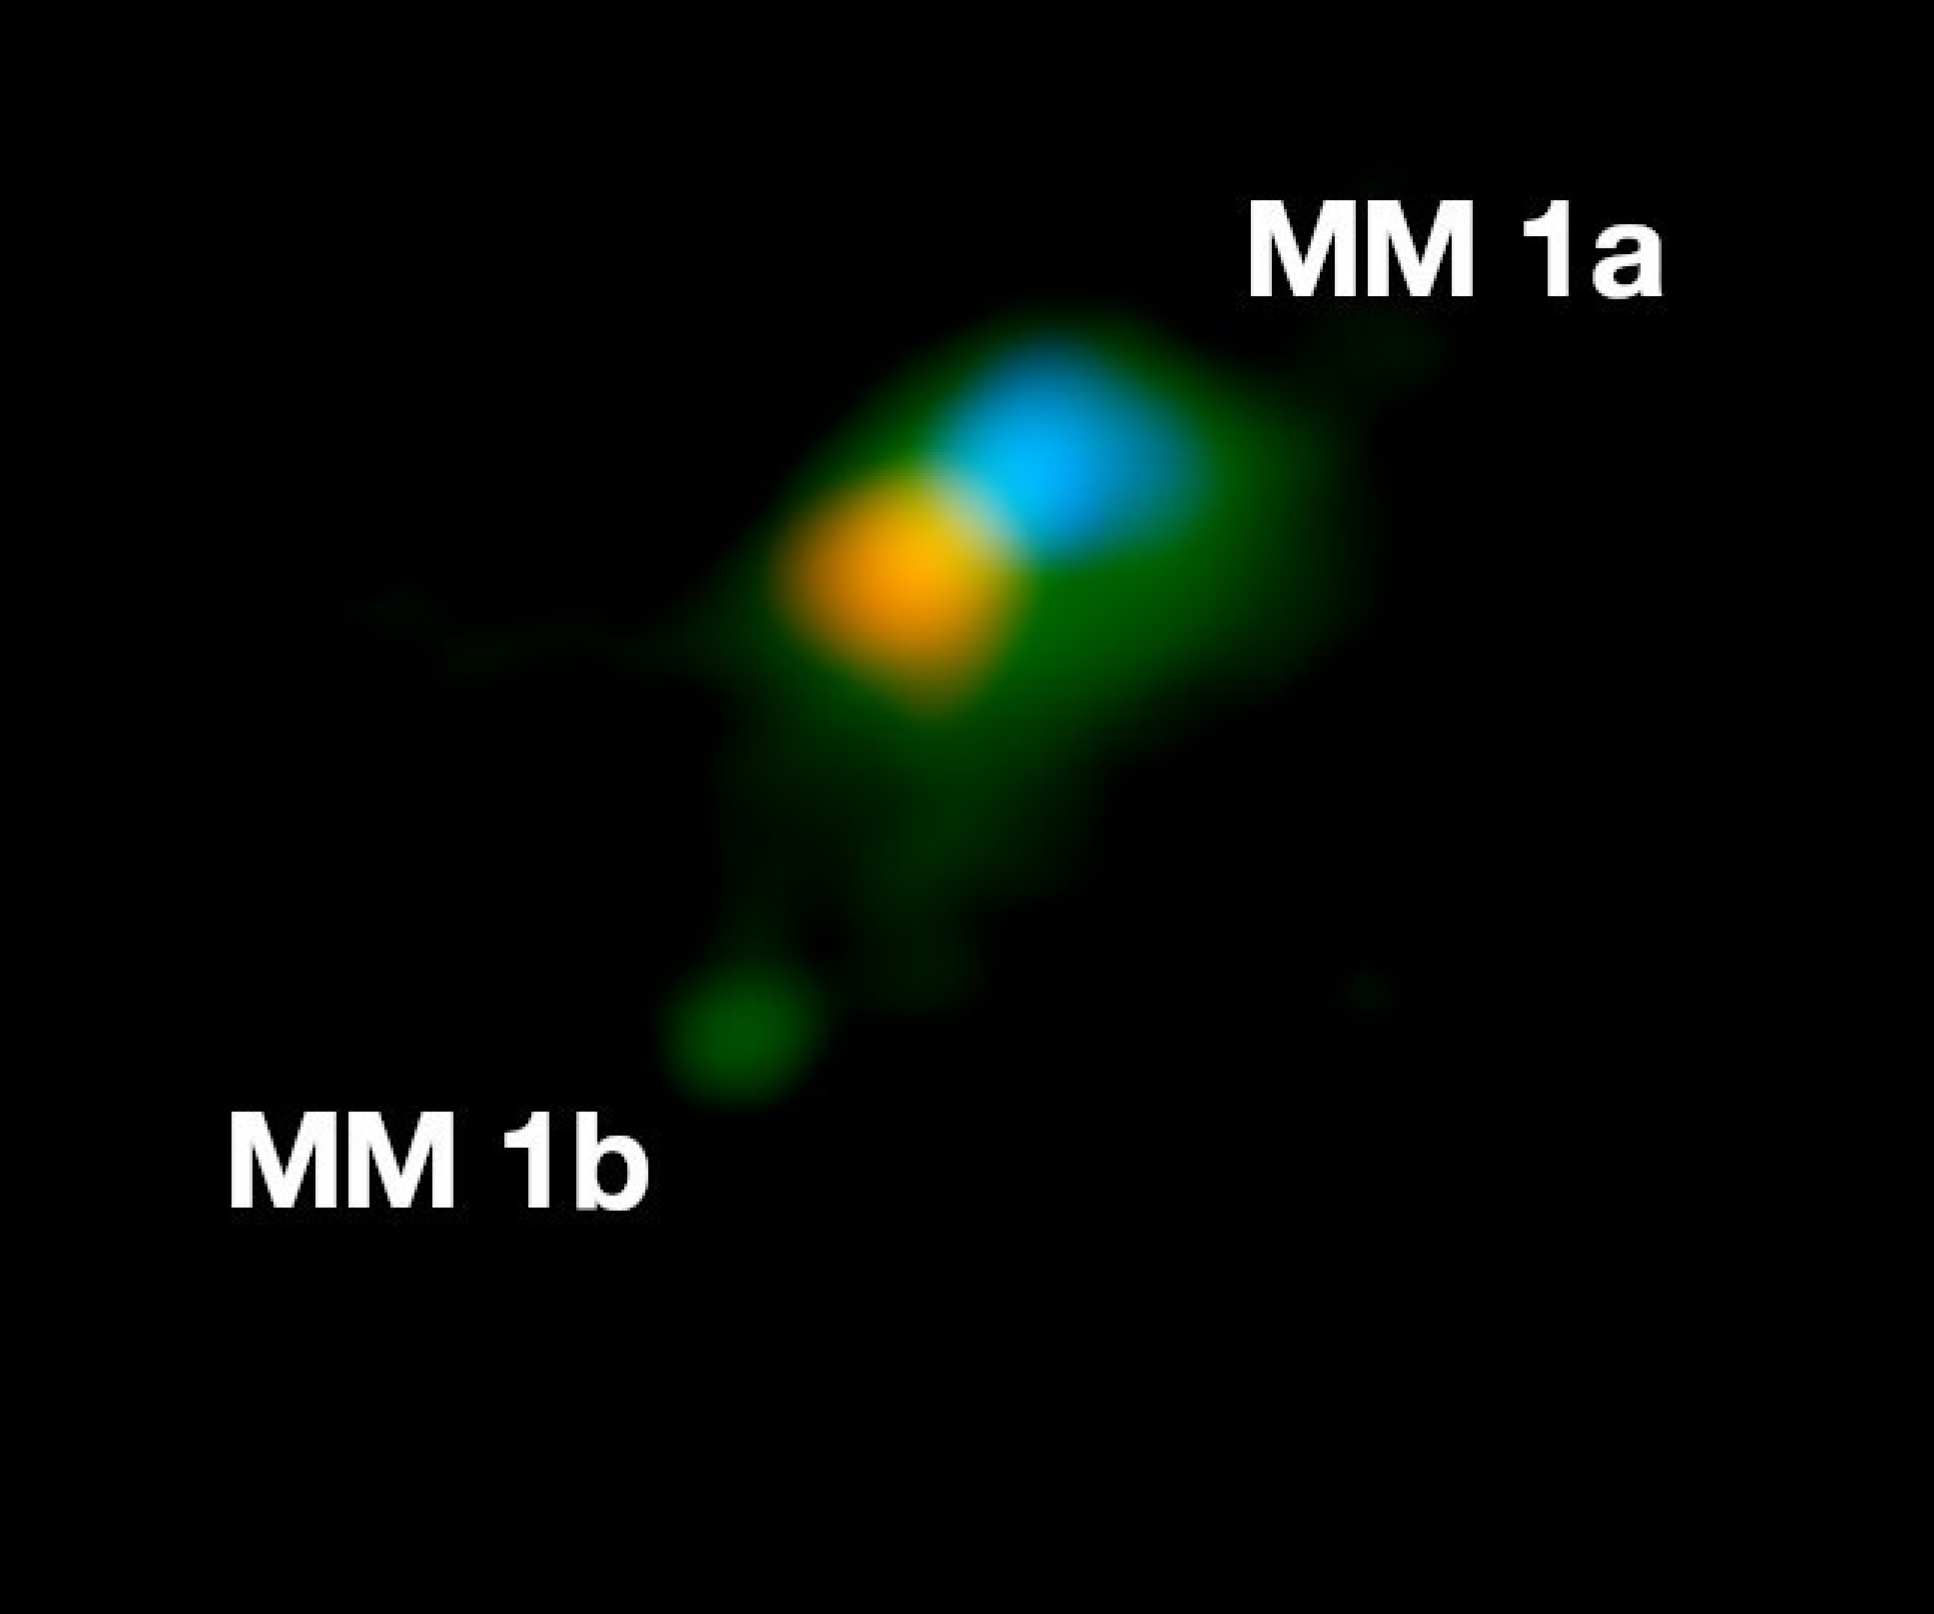 A blue and yellow blob labelled MM 1a and a smaller green blob labelled MM 1b